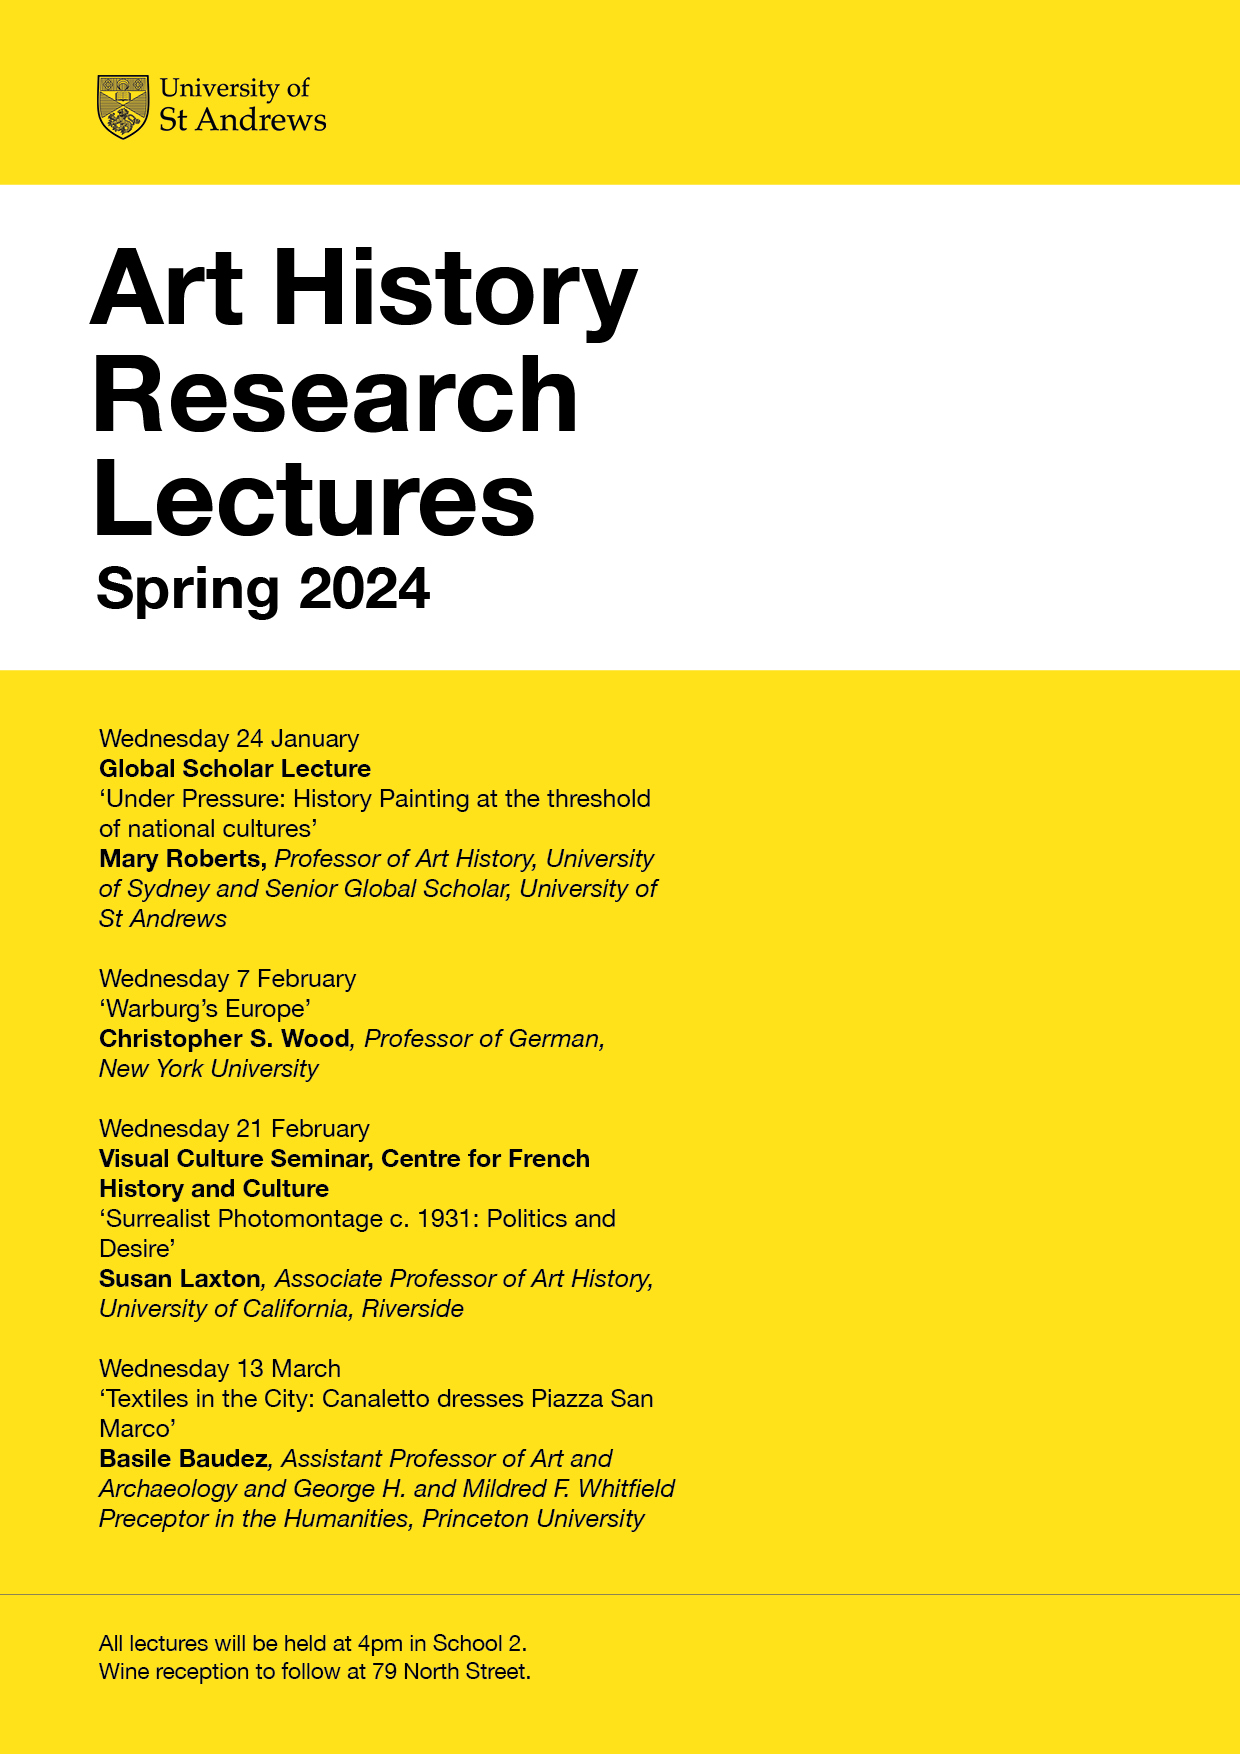 Art History Research Lectures date poster for Spring 2024